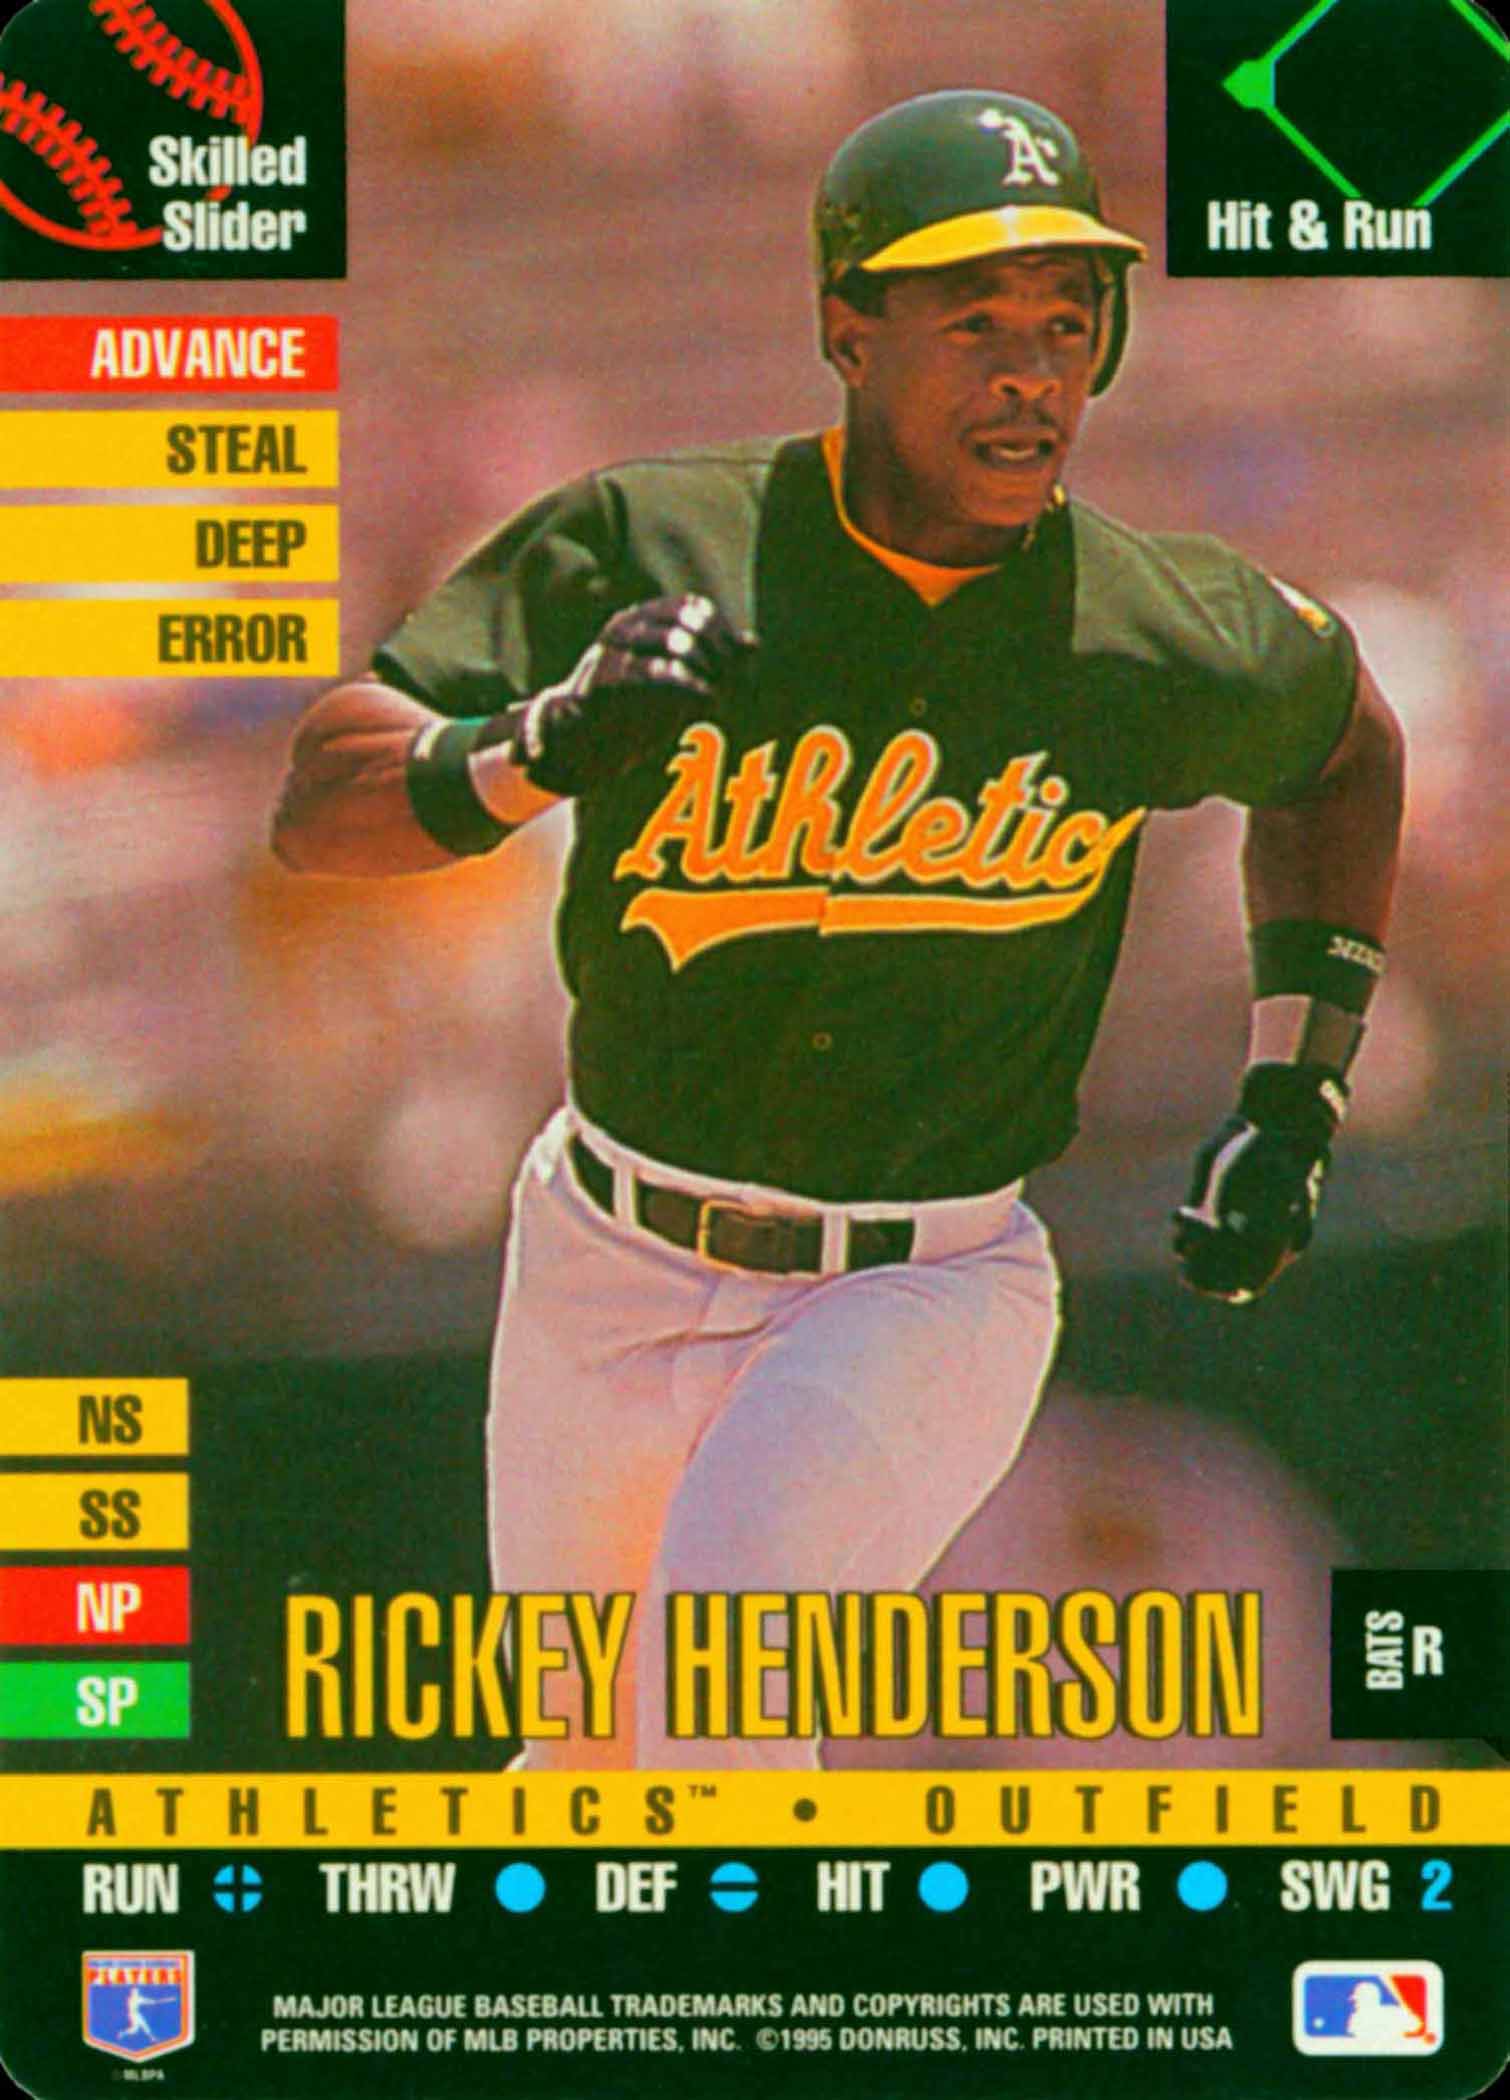 1995 Donruss Top of the Order